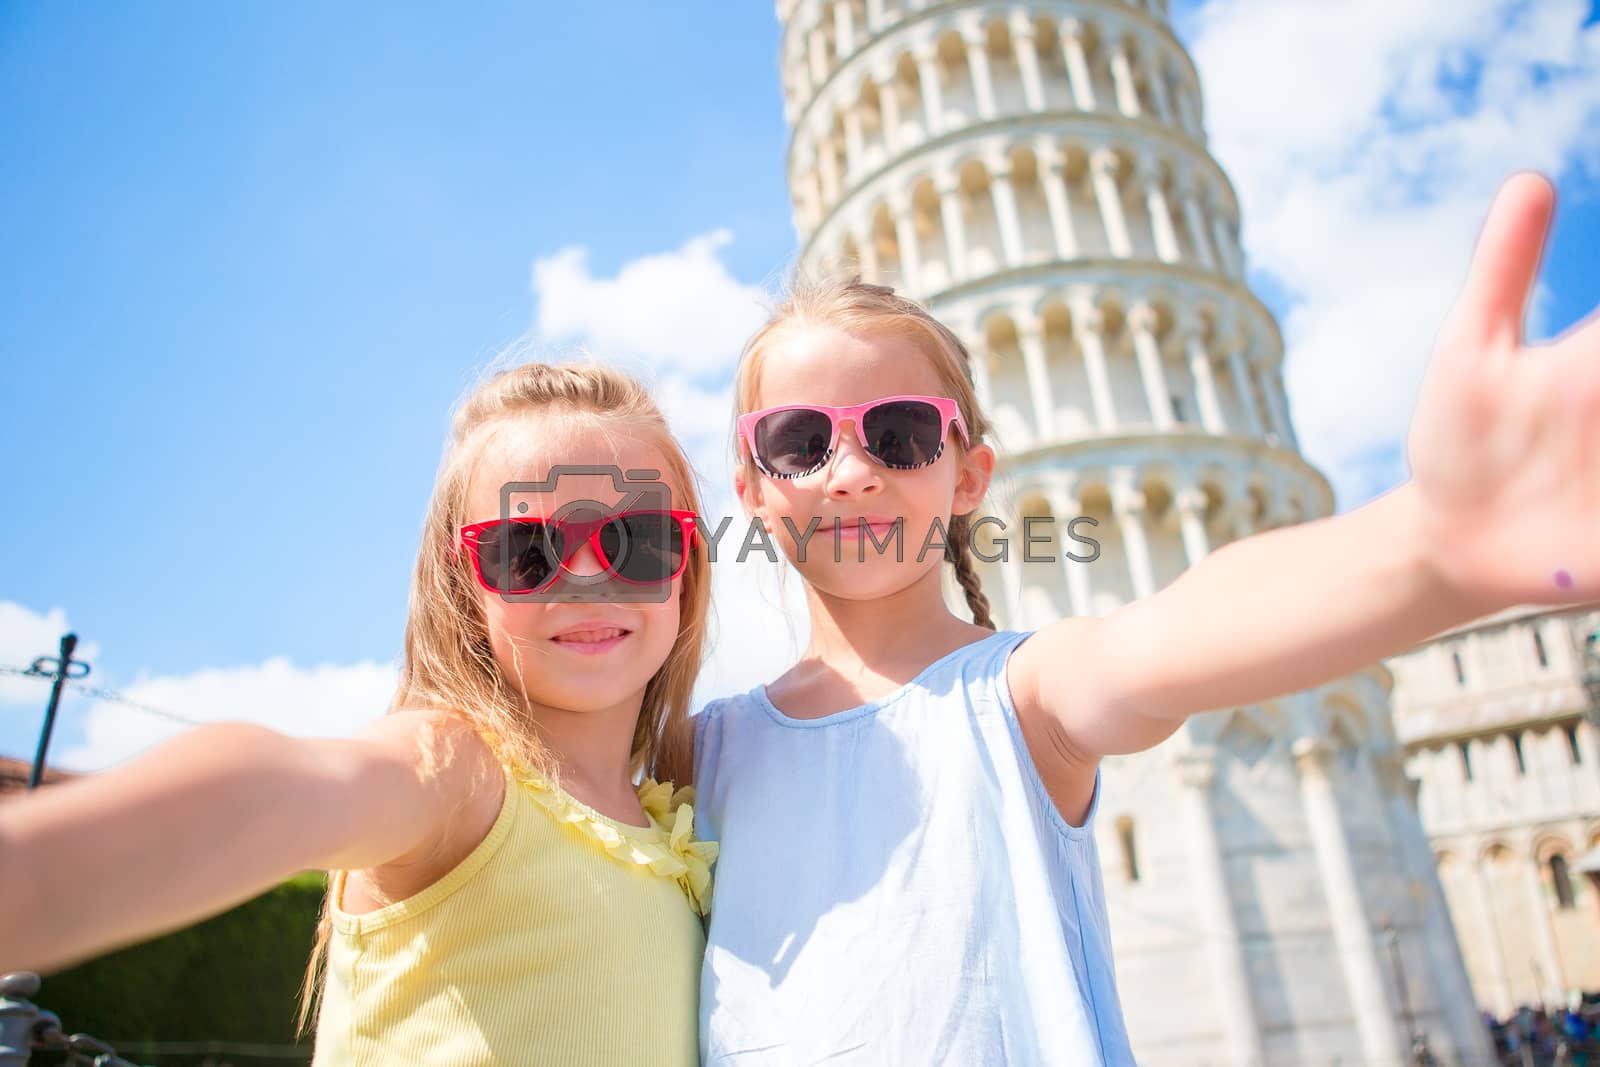 Royalty free image of Little kids taking selfie background the Leaning Tower in Pisa, Italy. Photo about european vacation by travnikovstudio